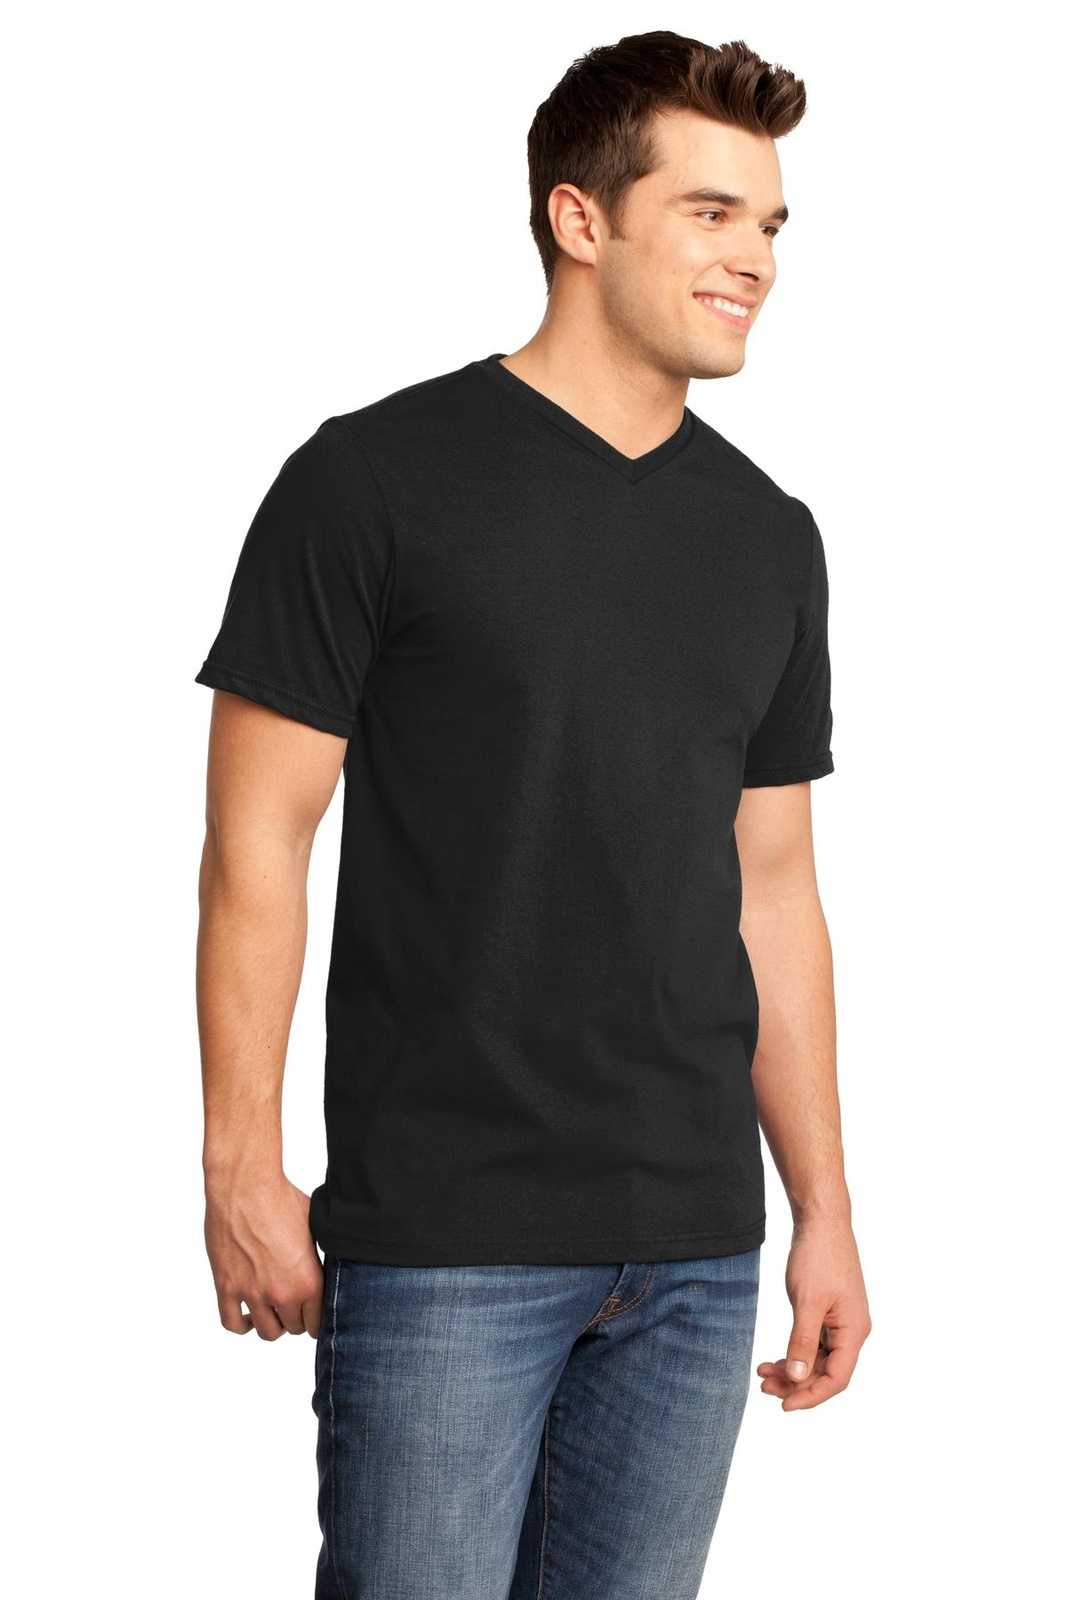 District DT6500 Very Important Tee V-Neck - Black - HIT a Double - 4